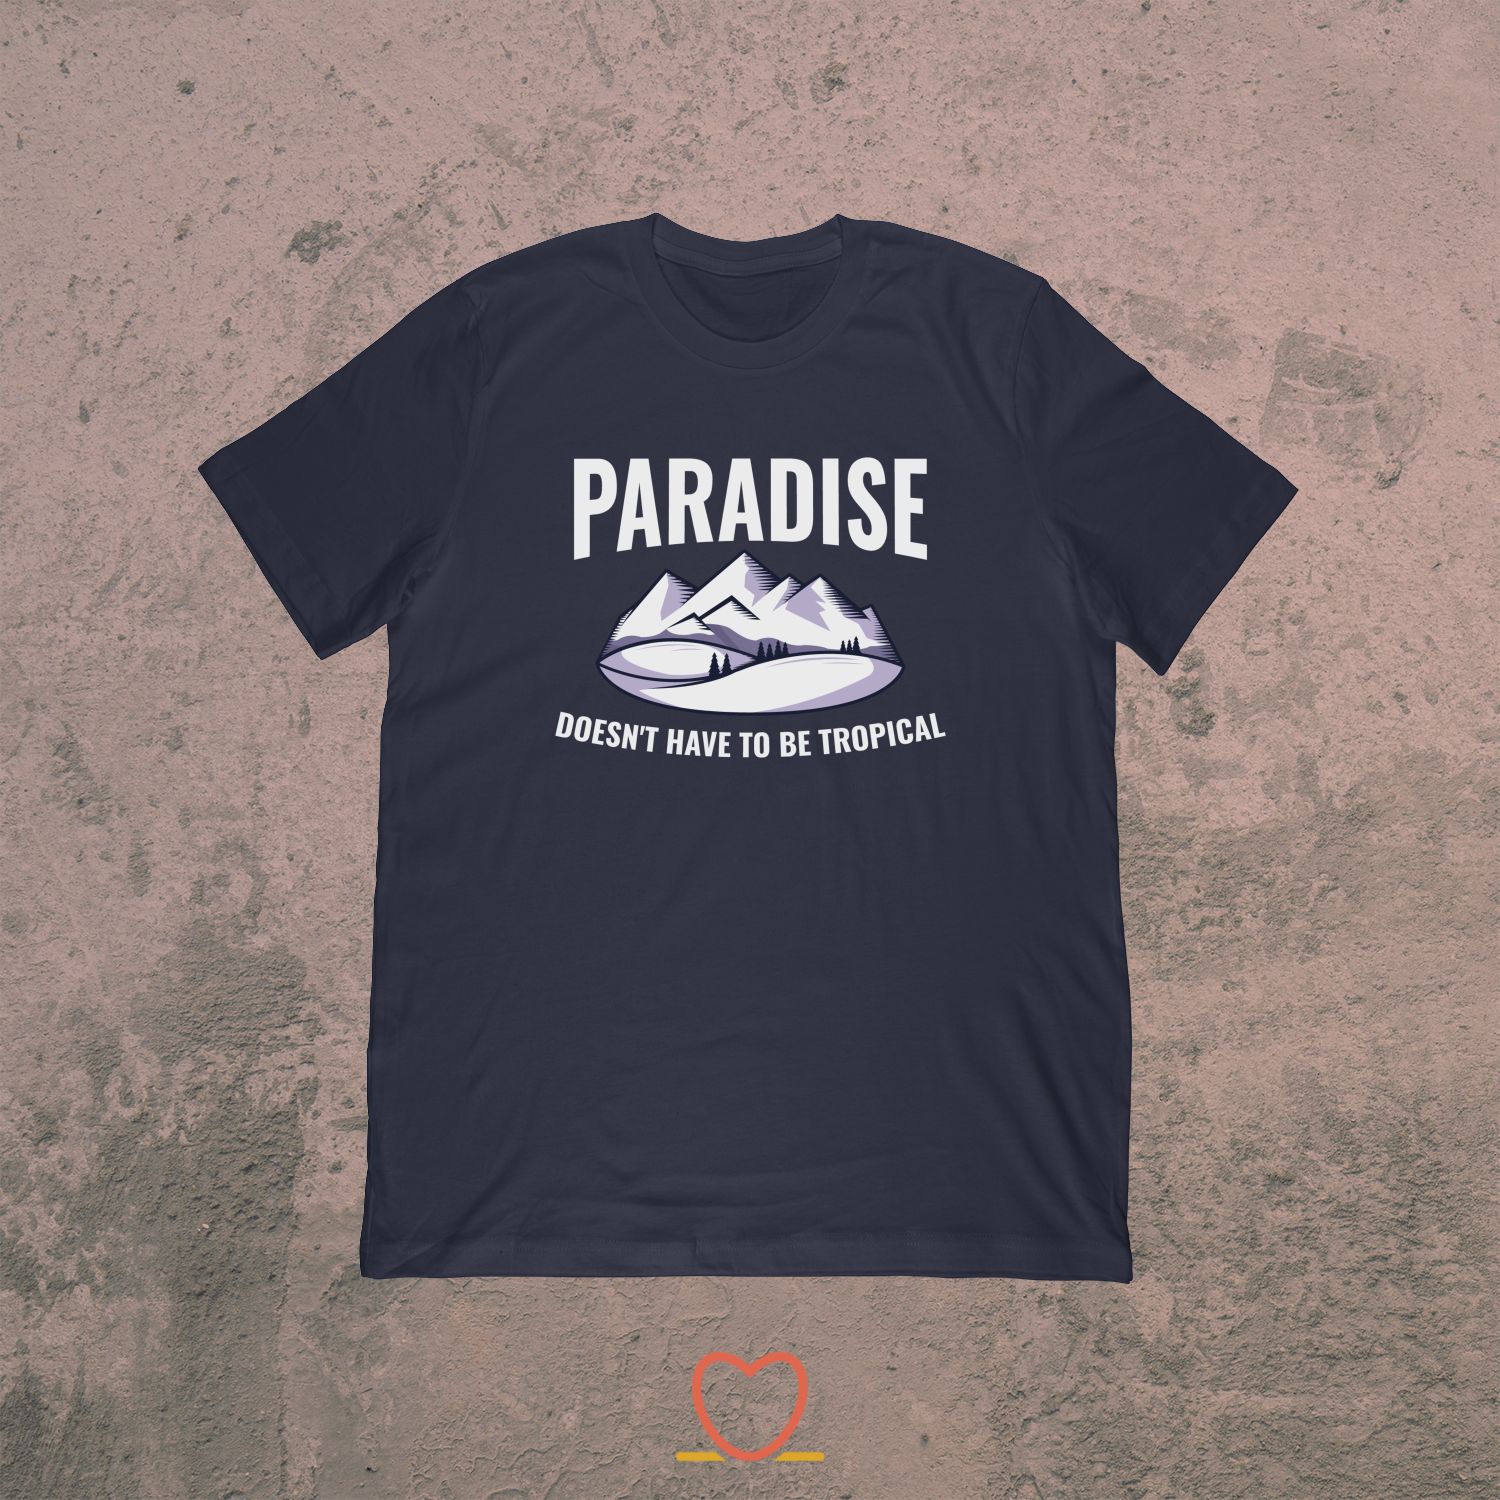 Paradise Doesn’t Have To Be Tropical – I Heart Skiing Tee